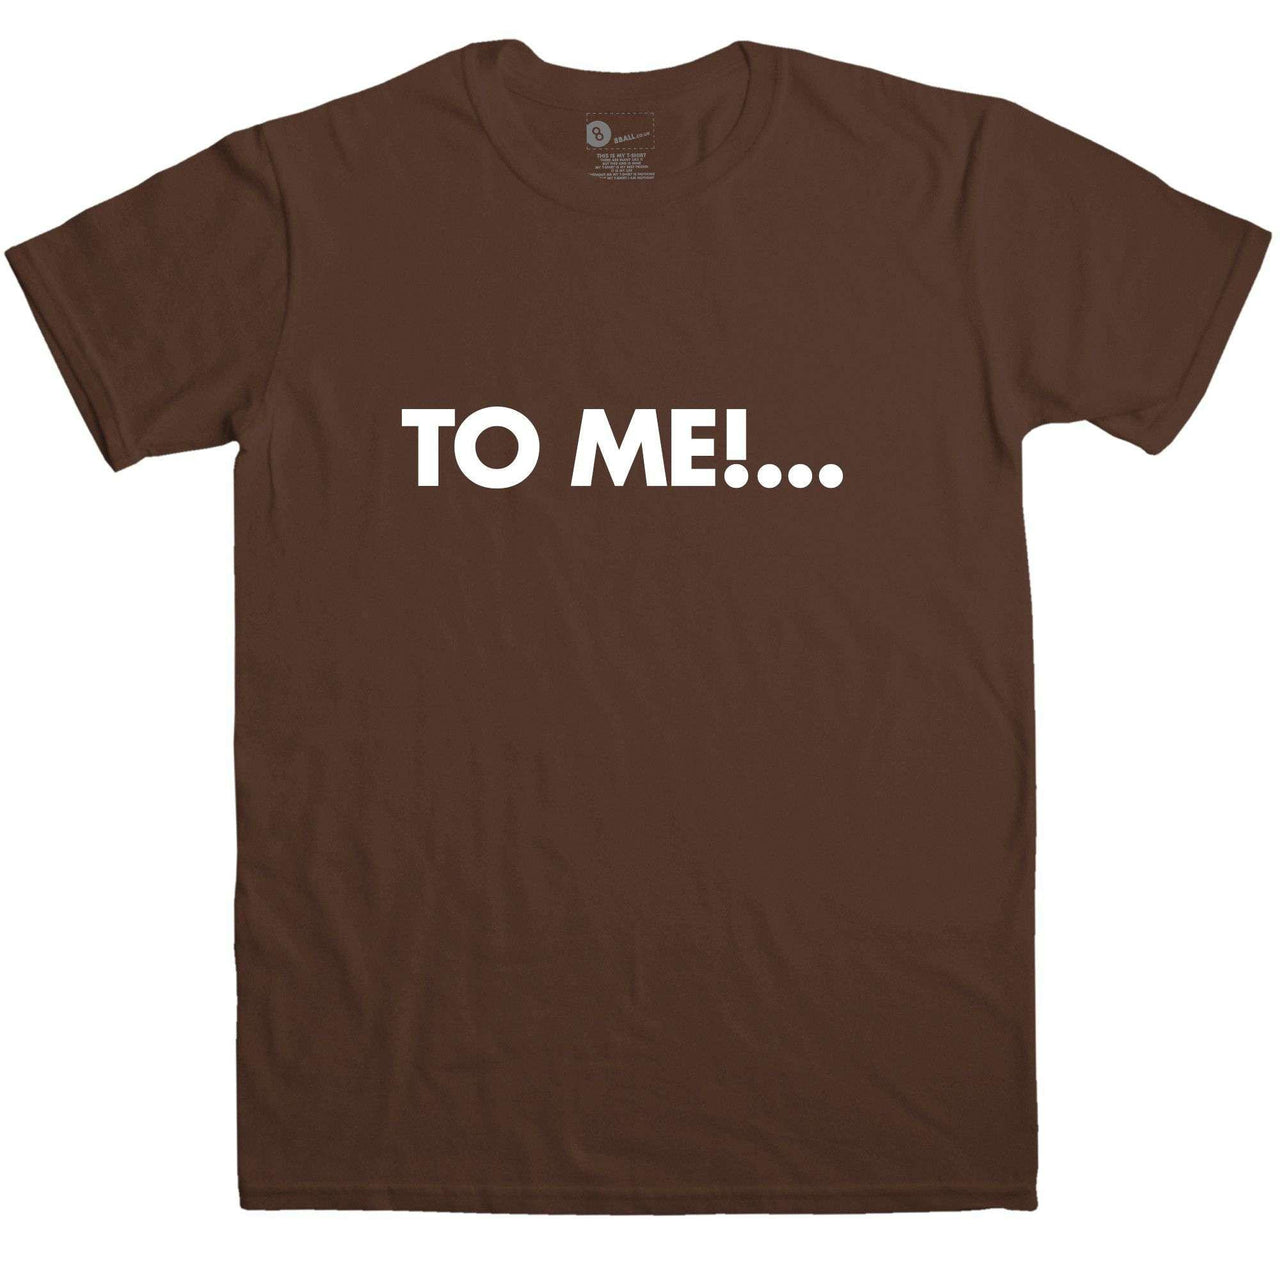 To Me Graphic T-Shirt For Men, Inspired By Chuckle Brothers 8Ball